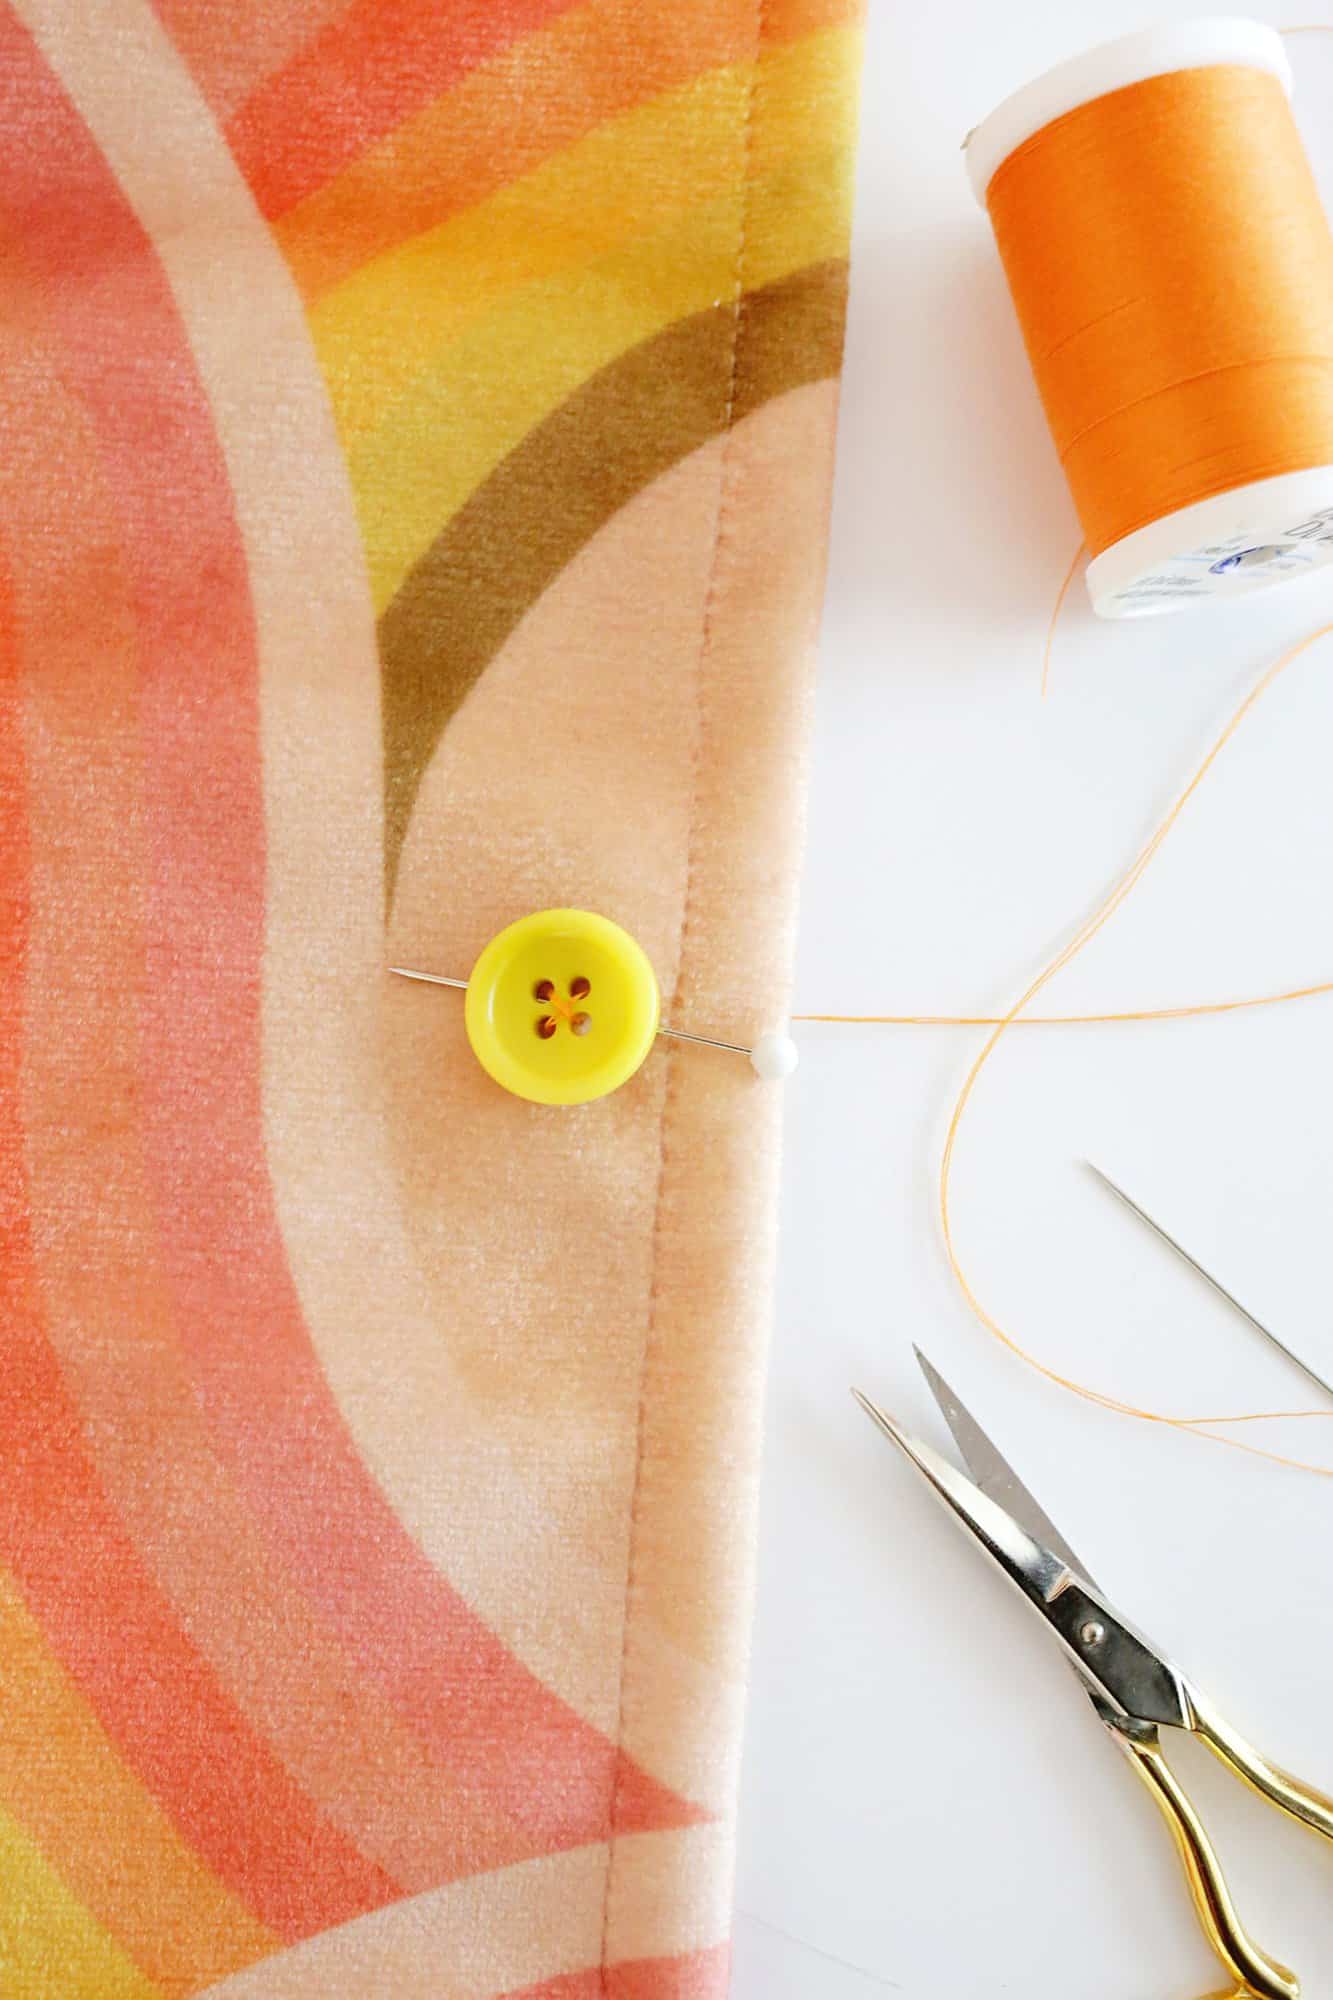 sewing a button onto fabric